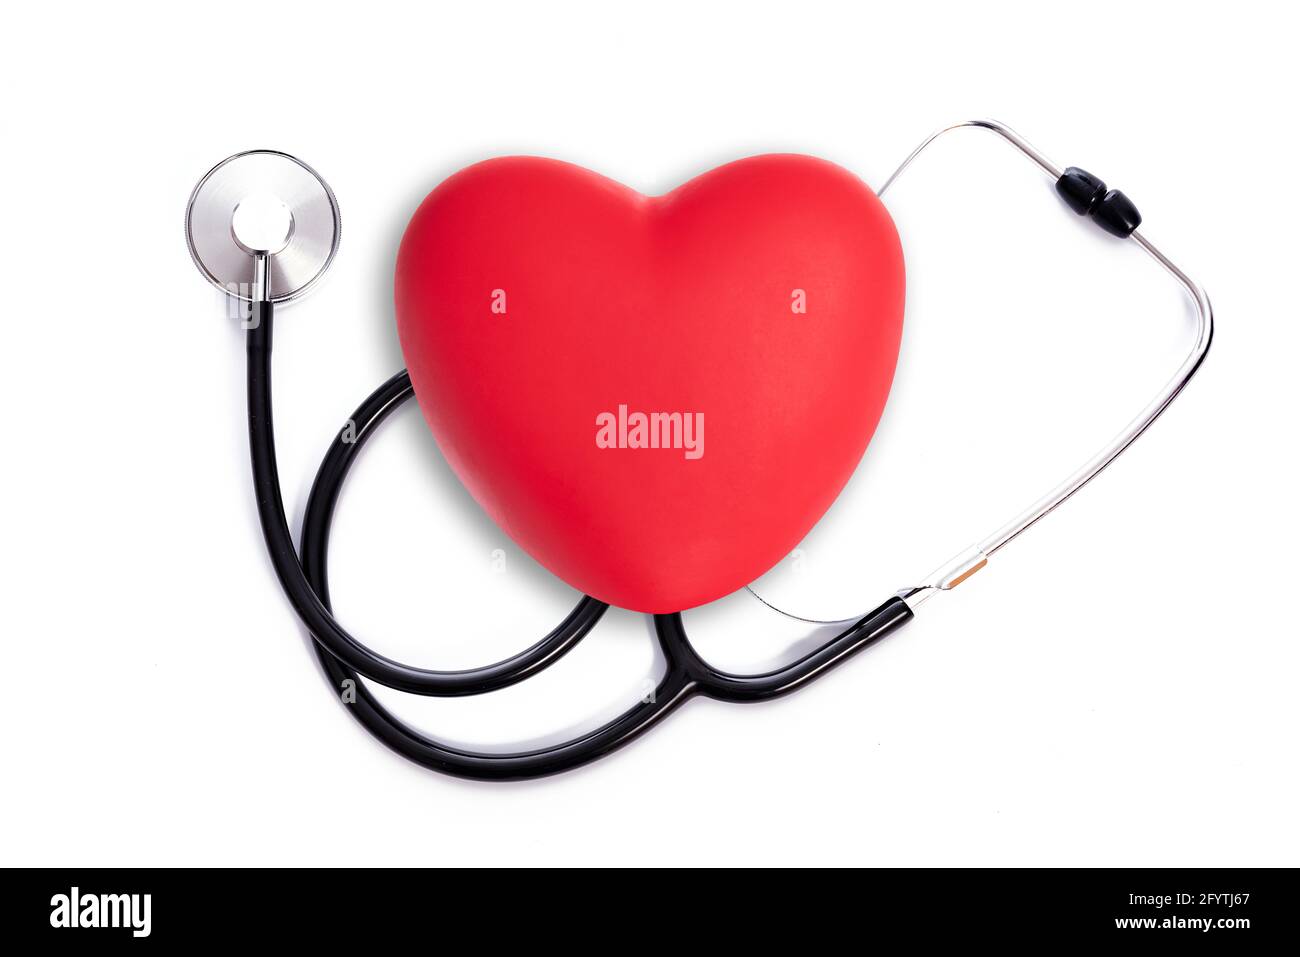 Health Care treatment concept - red heart shape with medical stethoscope on a white background Stock Photo